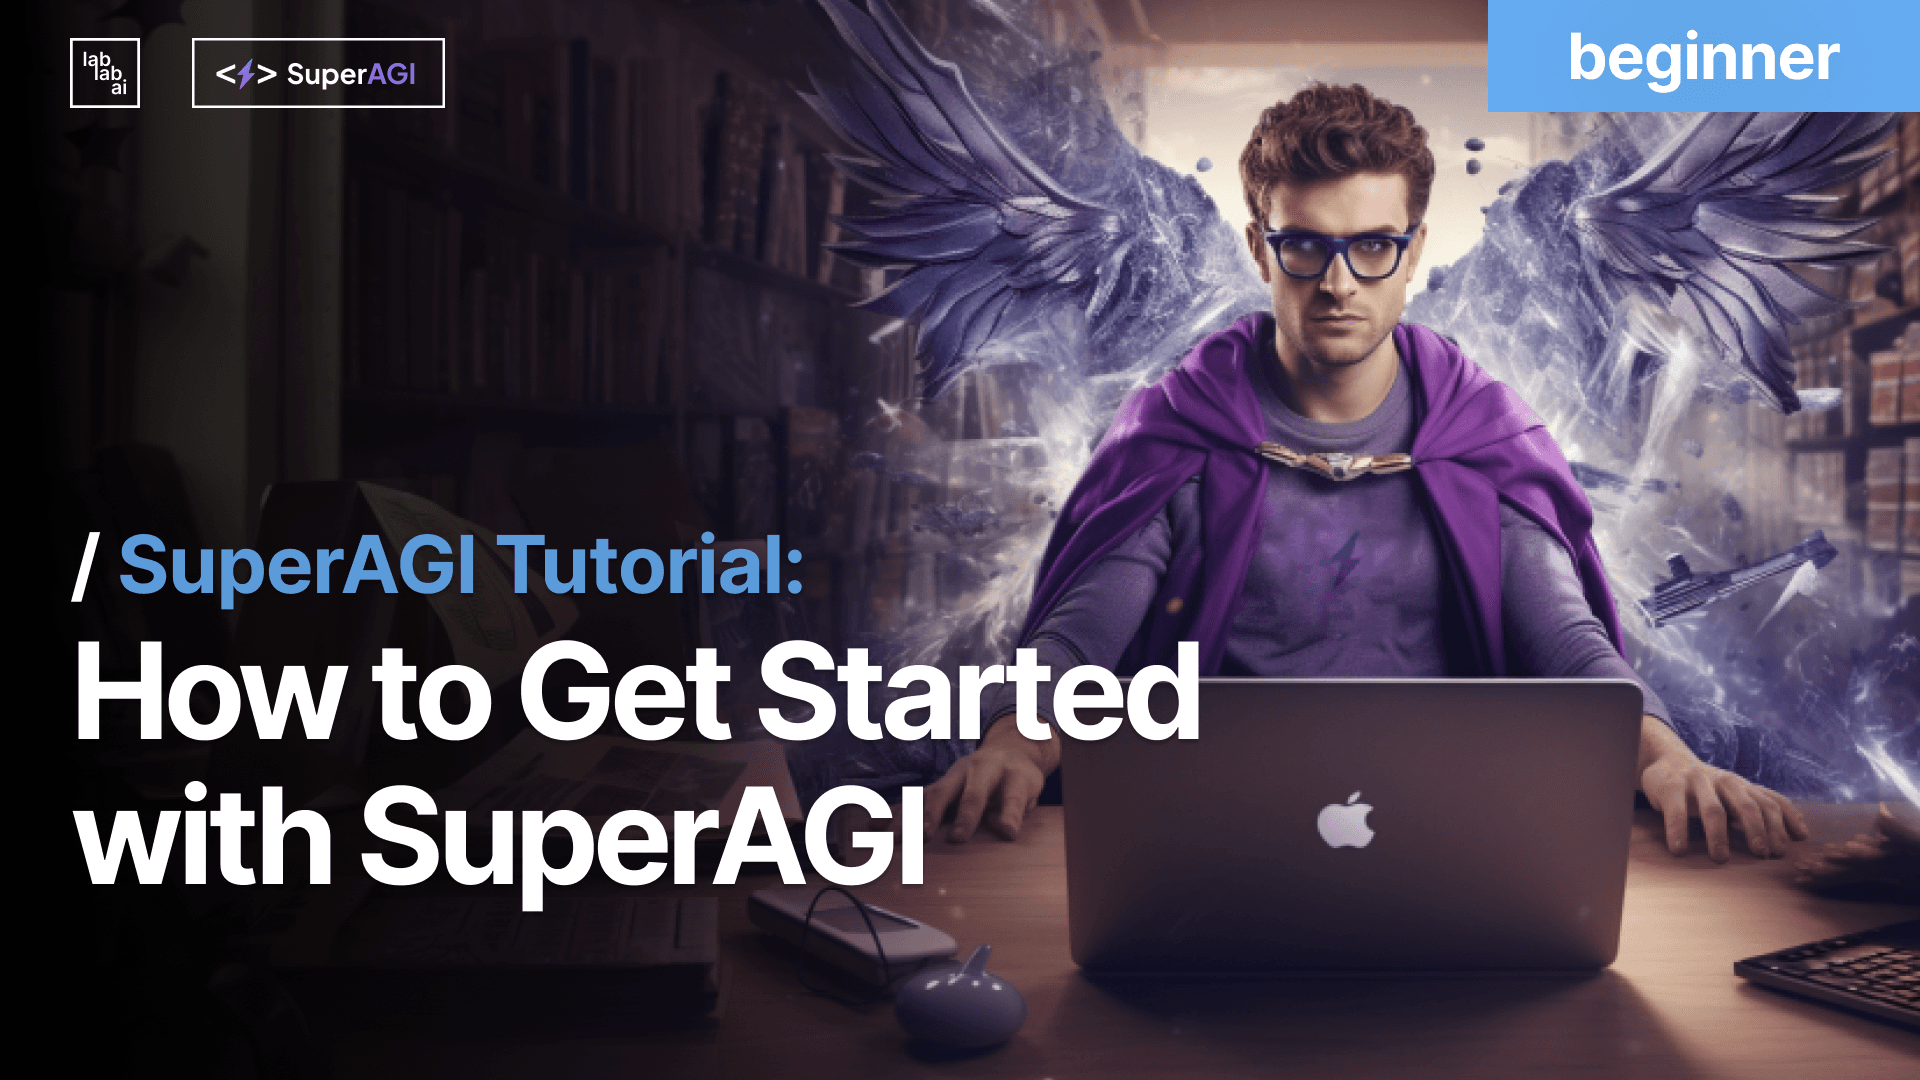 SuperAGI Tutorial: How to Get Started with SuperAGI